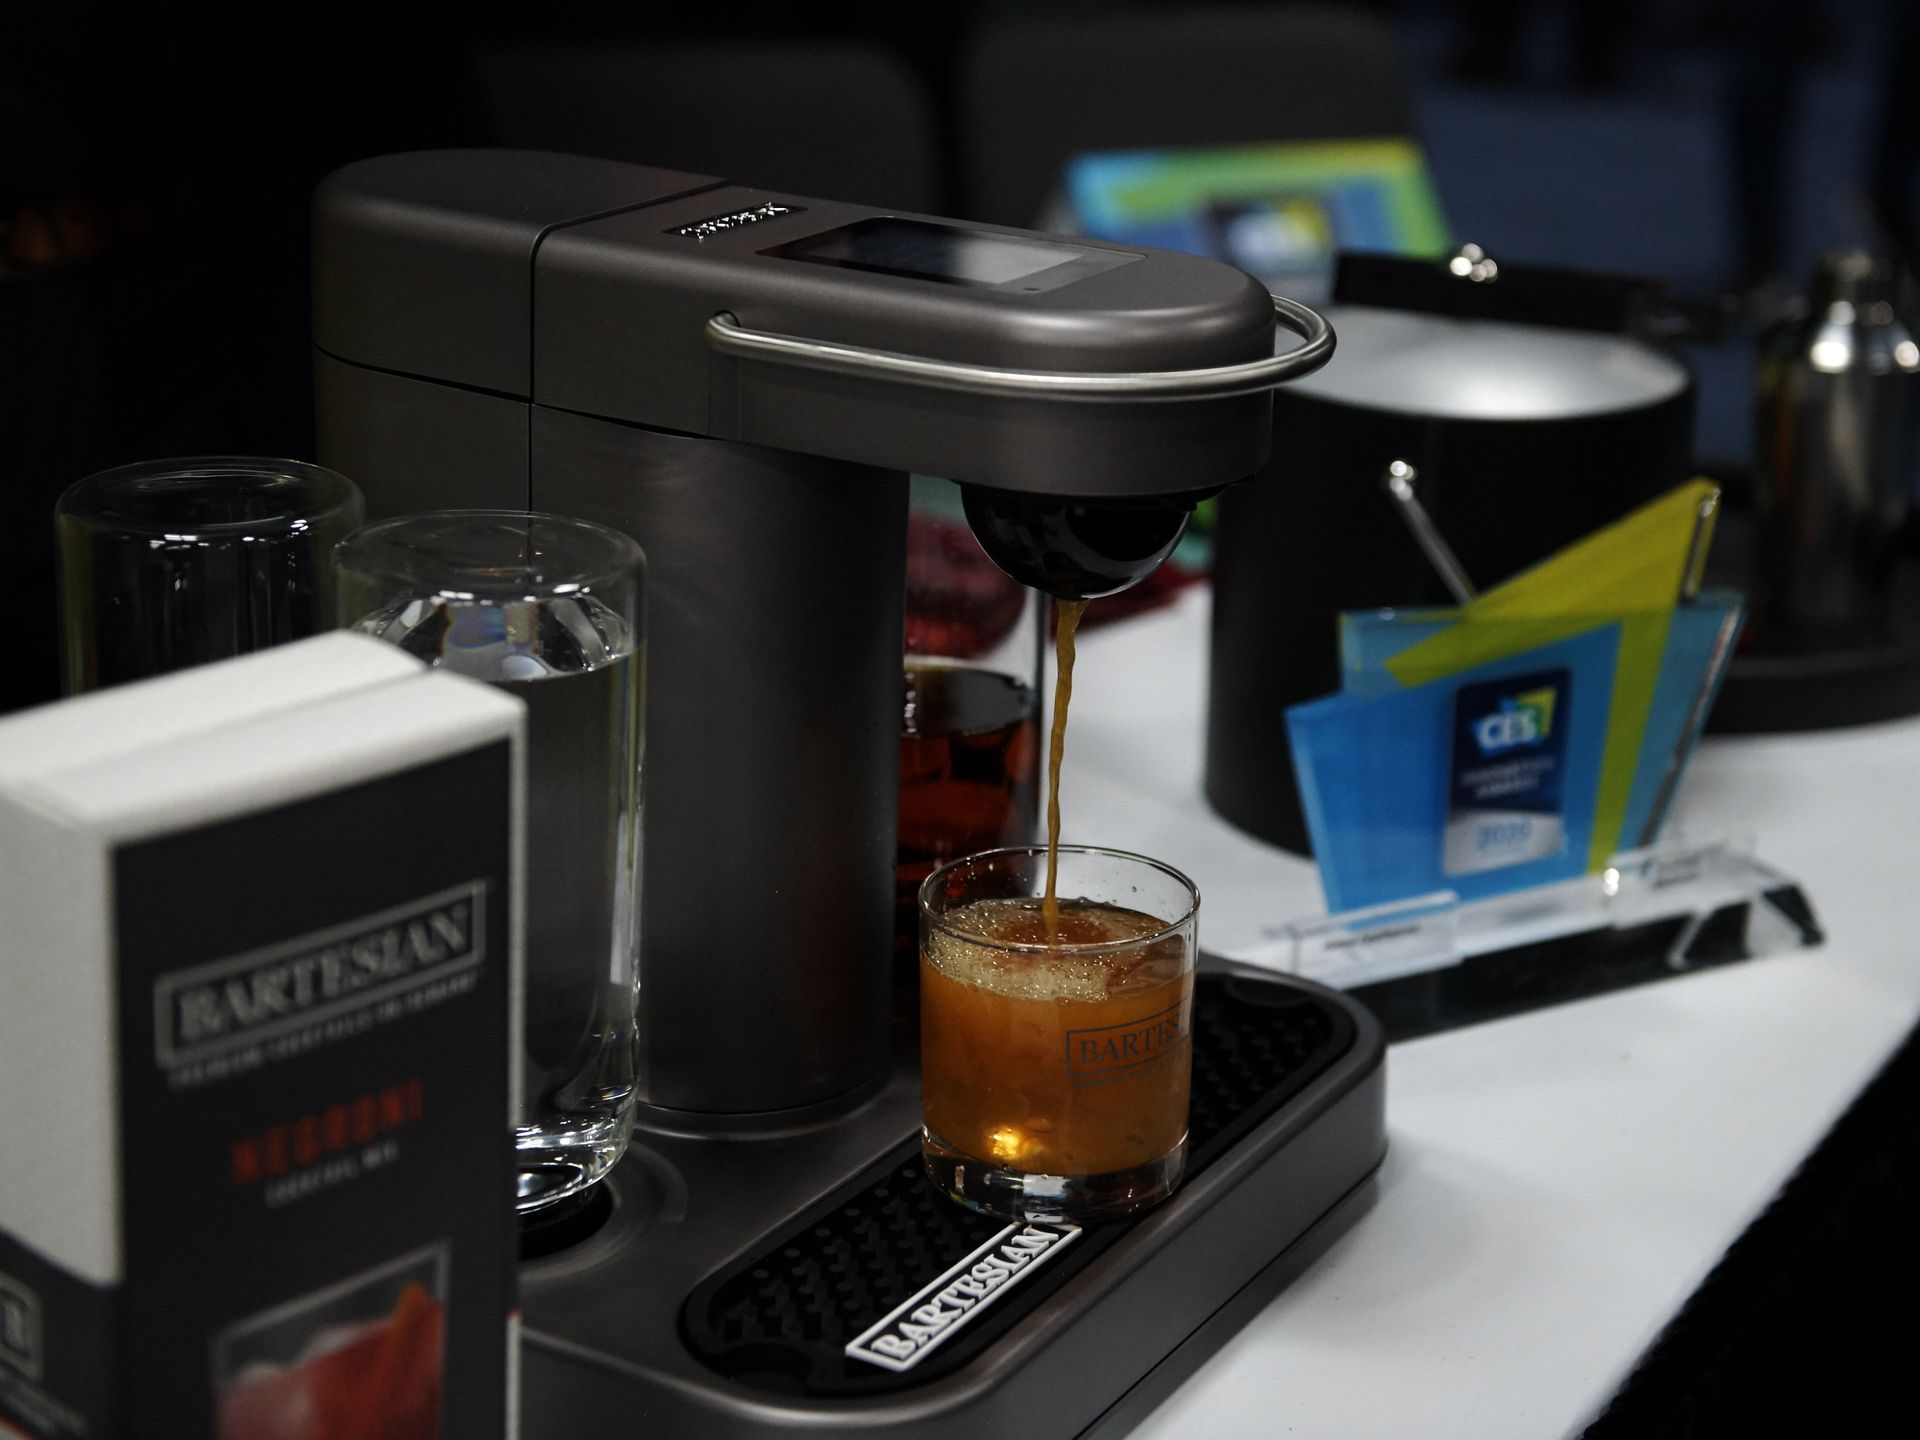 Bartesian's pro Keurig-style cocktail maker now $90 off at $360